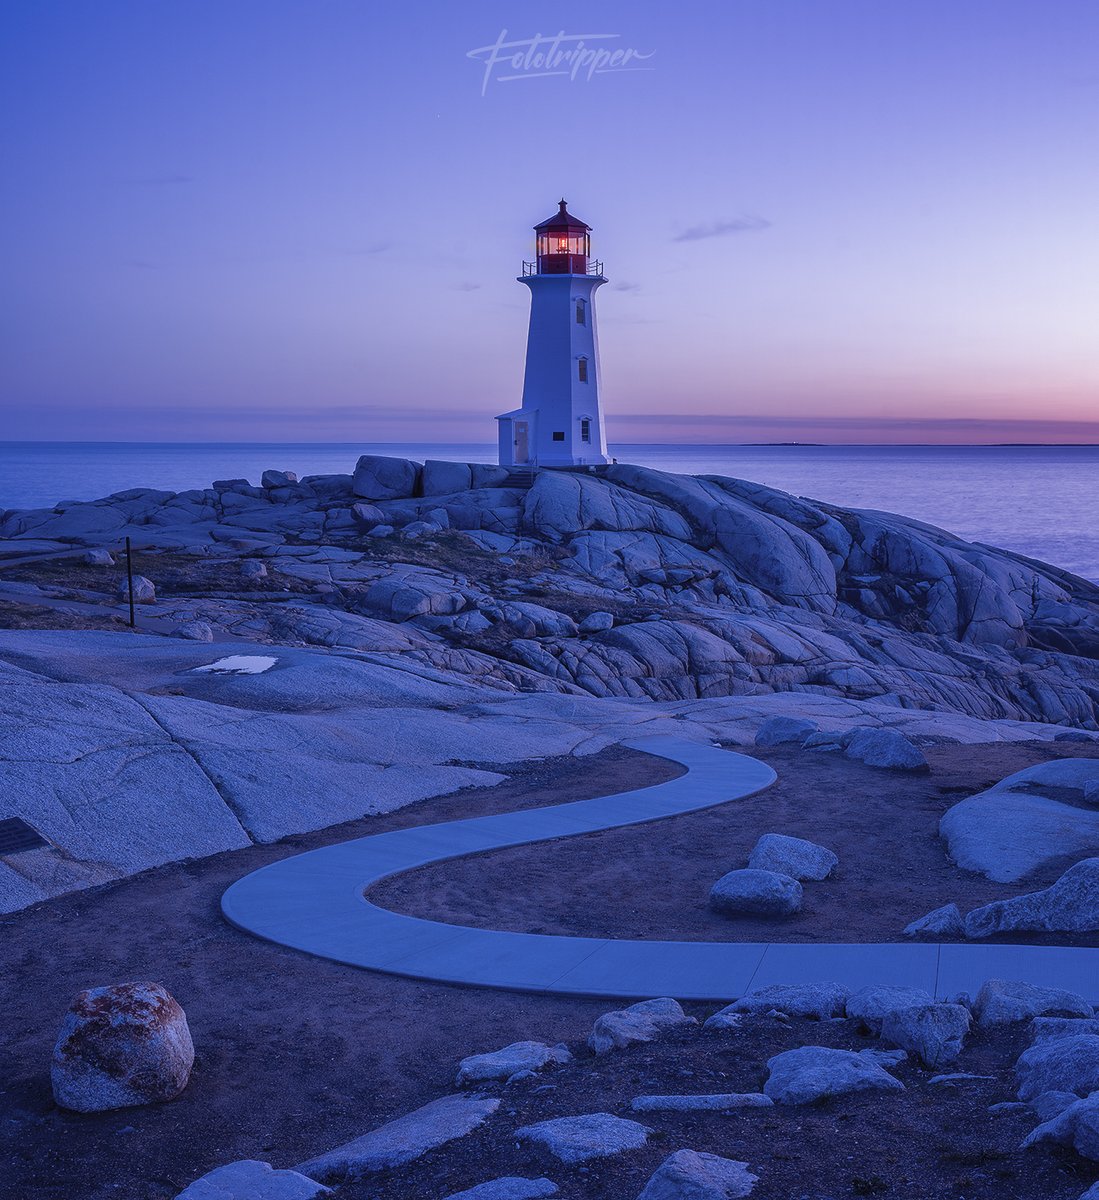 My first visit to Peggy's Cove #novacotia #peggyscove #fototripper